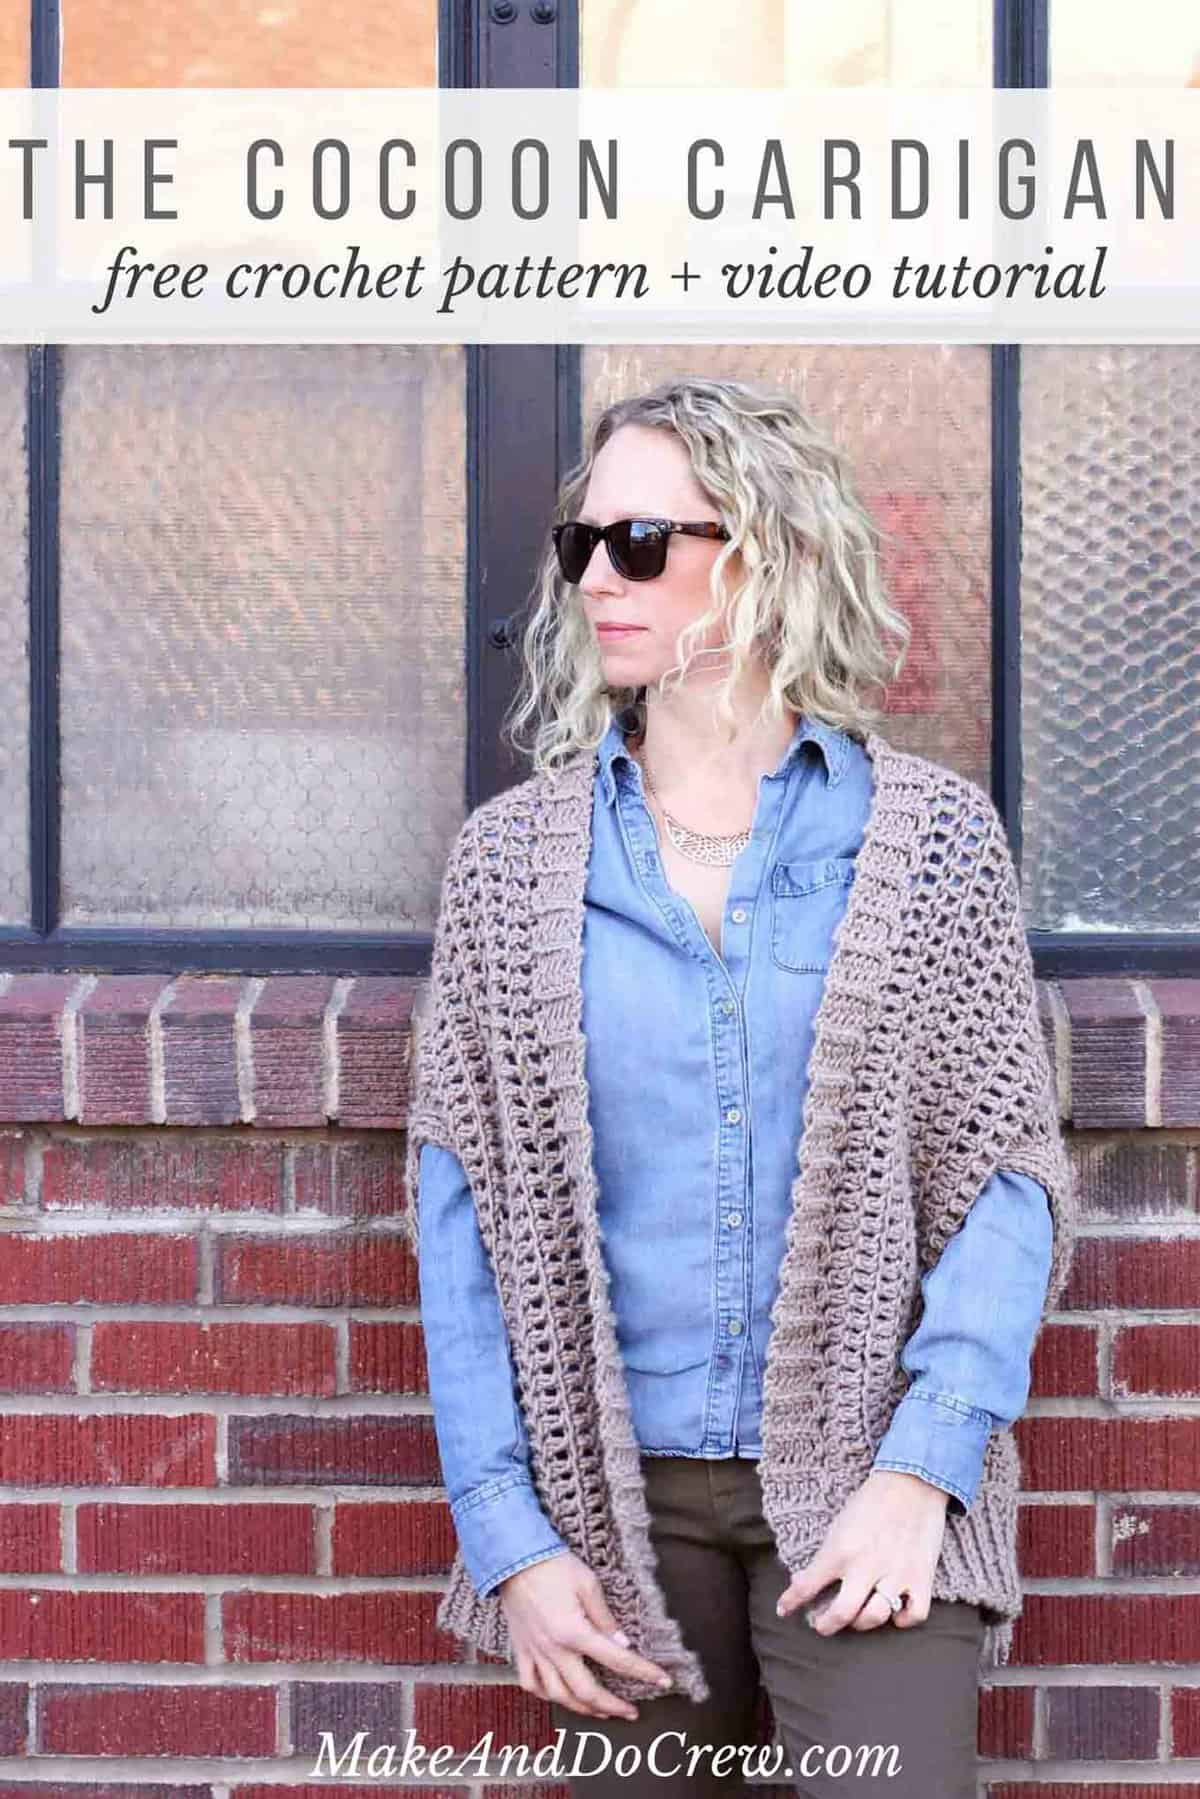 You'd never guess by looking at this free crochet sweater pattern that it's made from two simple rectangles! The "Cocoon Cardigan" free crochet pattern is great for beginners who are looking to expand their skills or advanced crocheters who want a quick, stylish project. Made with Lion Brand Lion's Pride Woolspun yarn in "Taupe." 